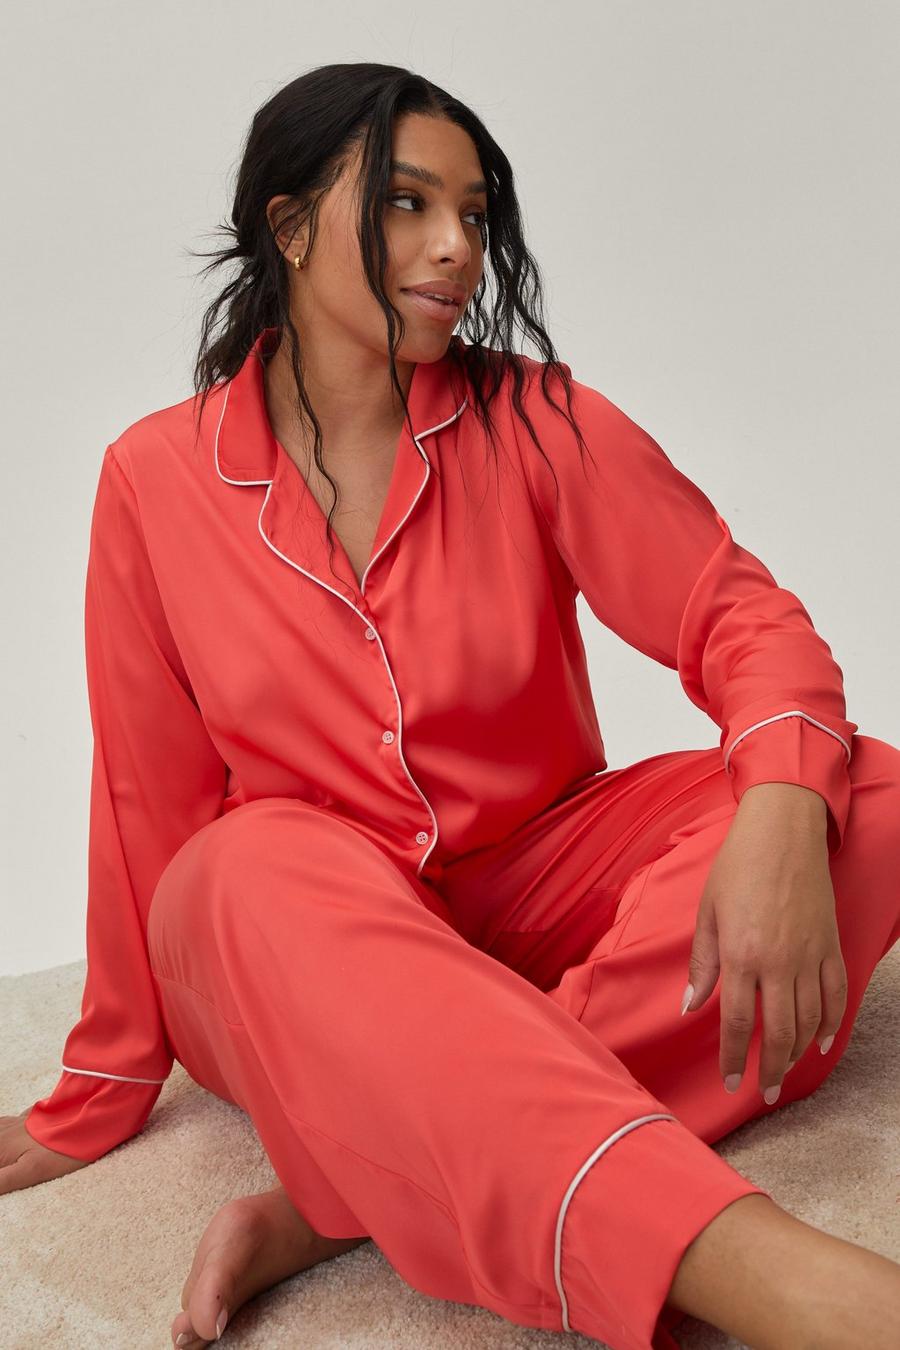 Plus Size Contrast Piping Shirt and Trousers Pyjama Set